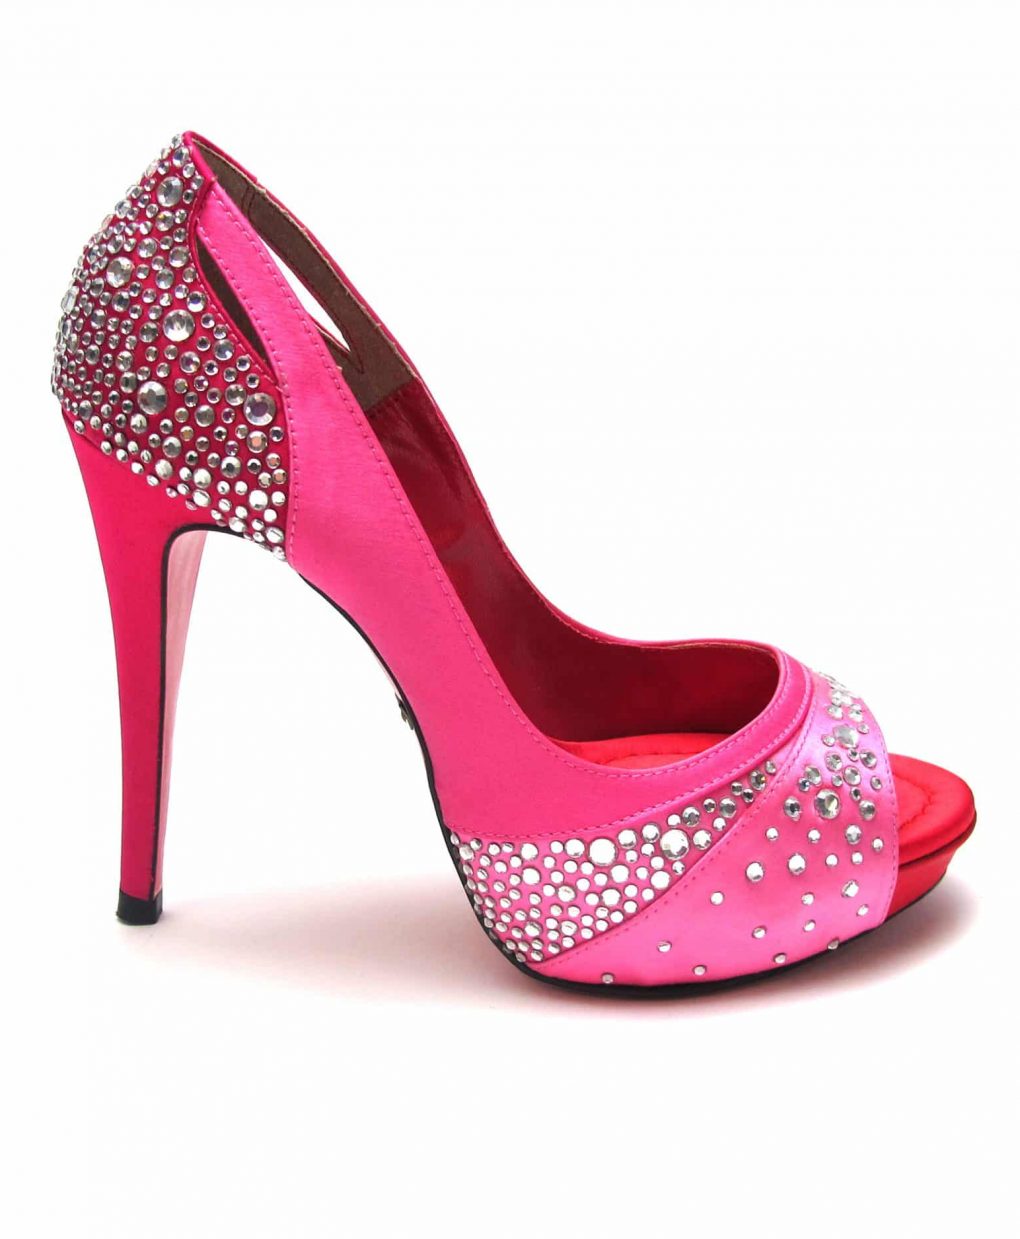 Suecomma Bonnie Couture Pink & Red Open Toe Heels